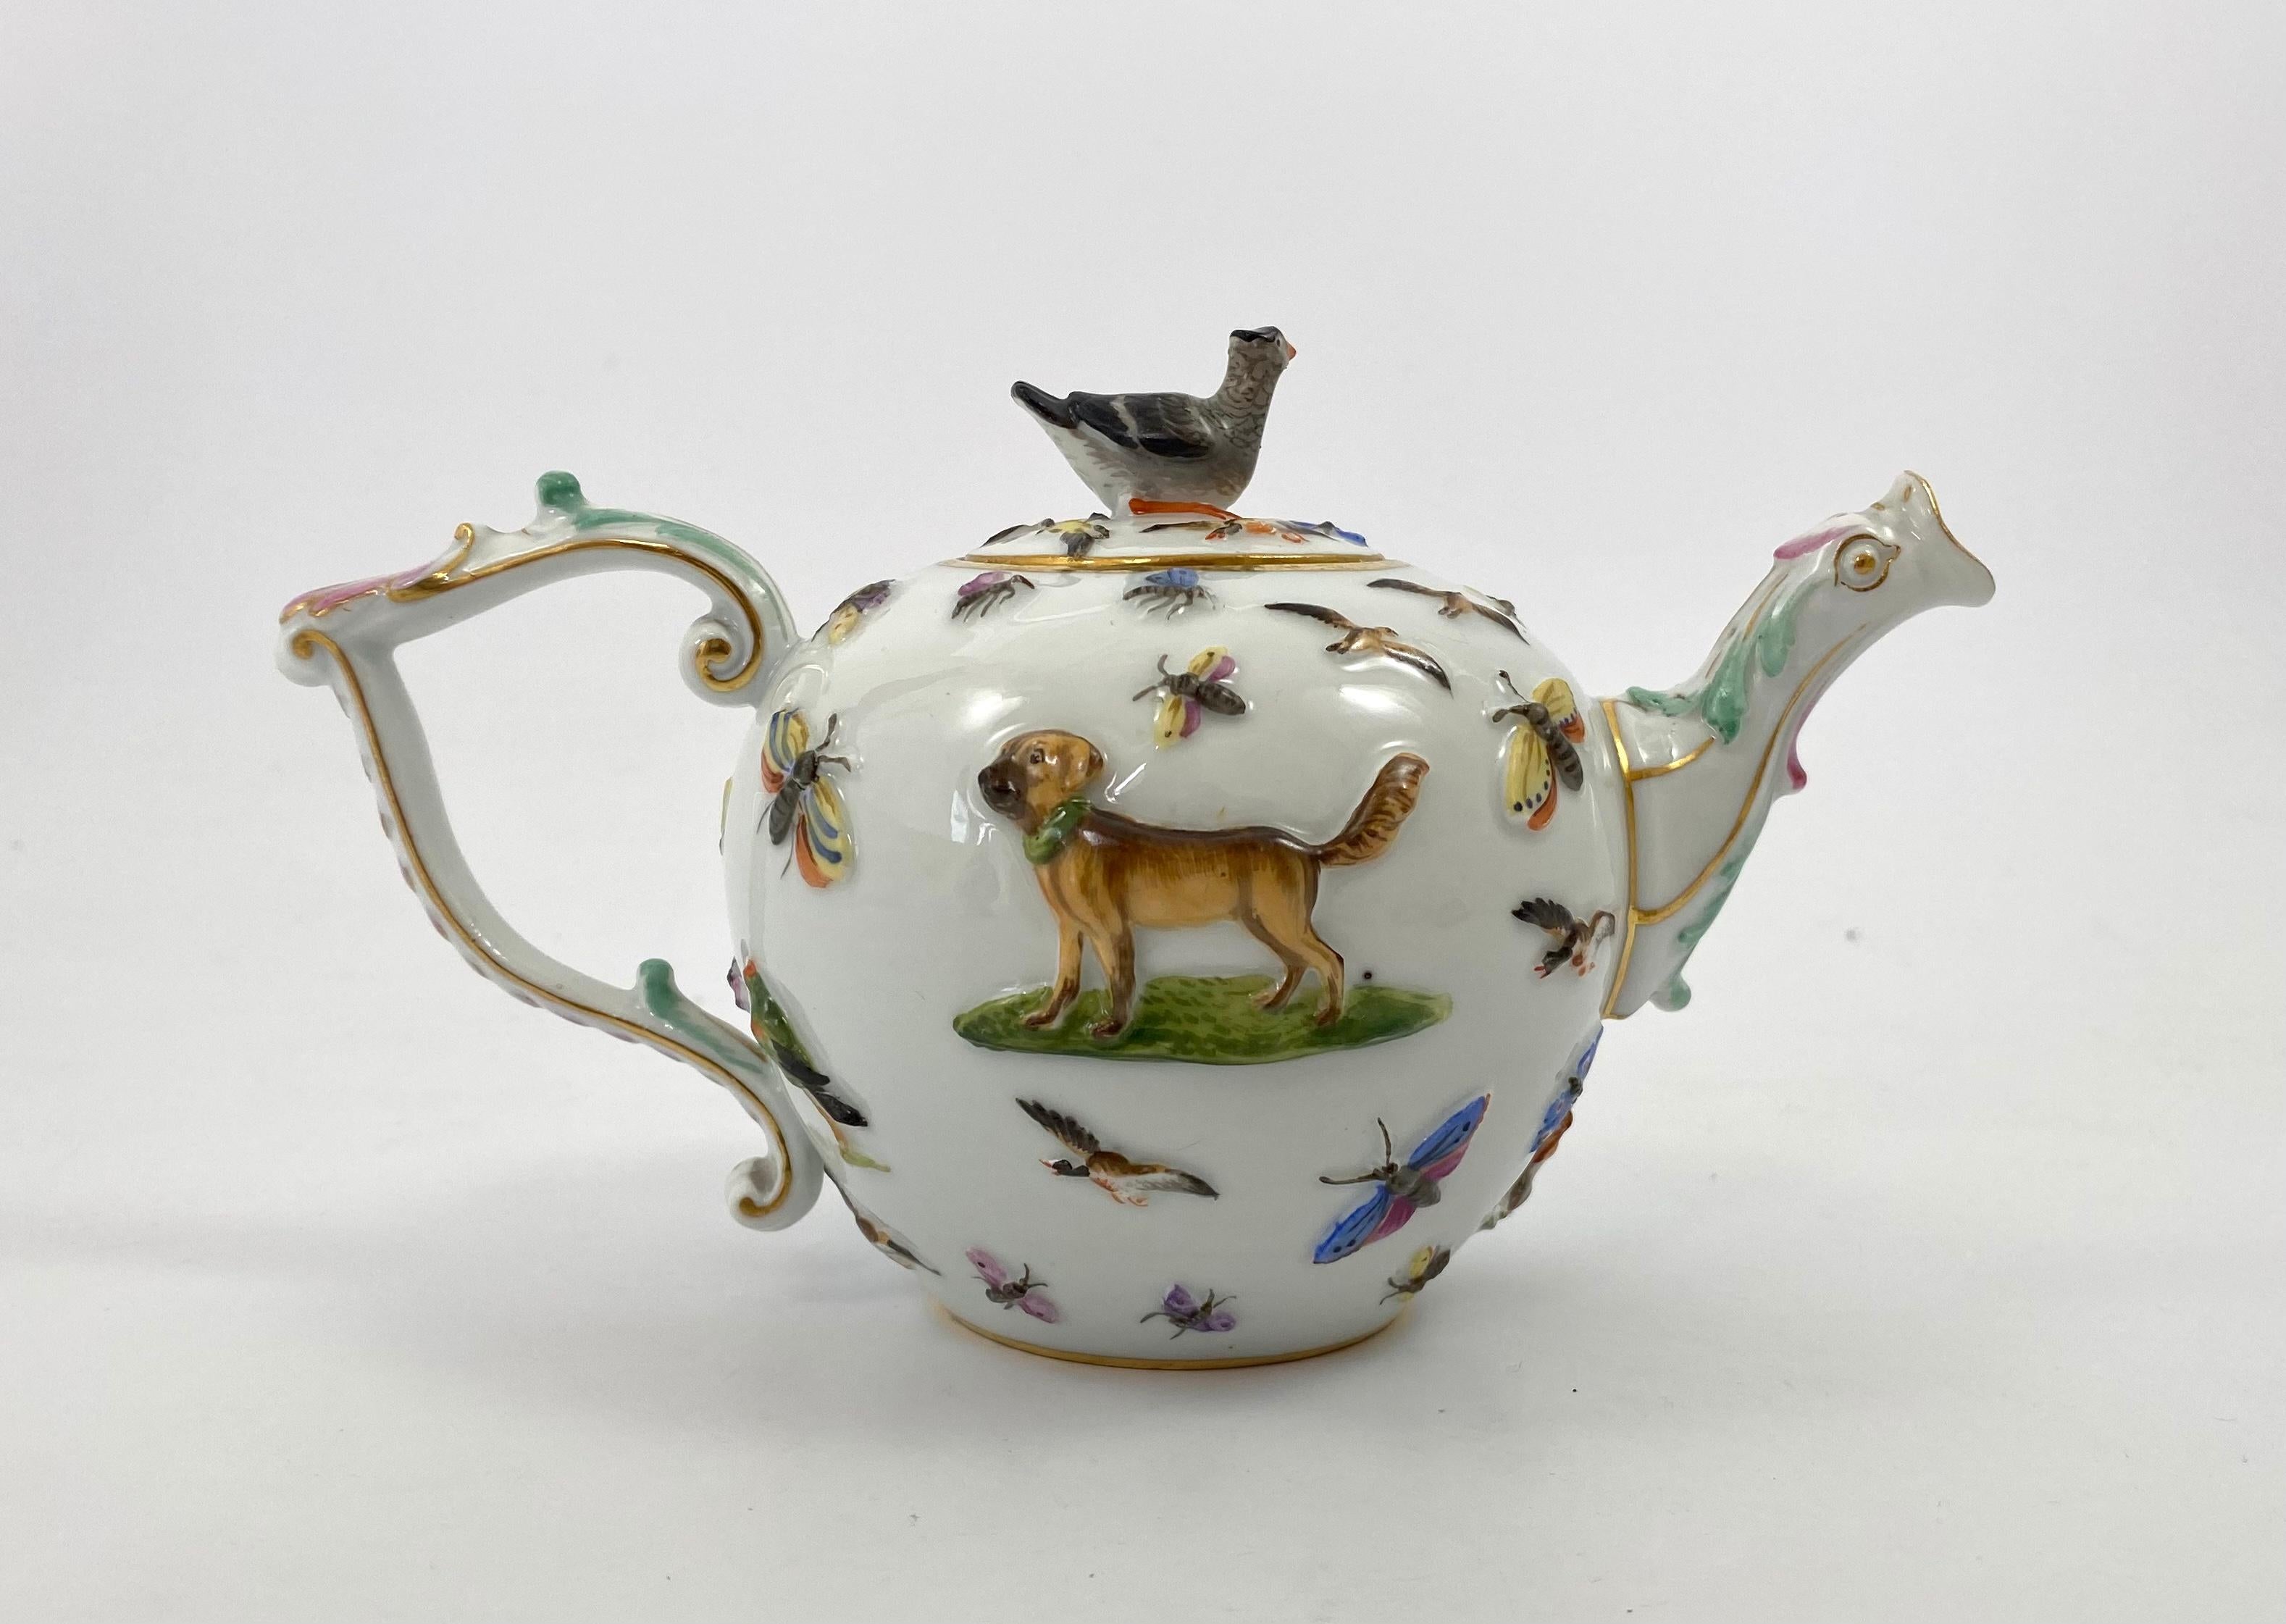 Fired Meissen Porcelain ‘Cats and Dogs’ Teapot, c. 1830.